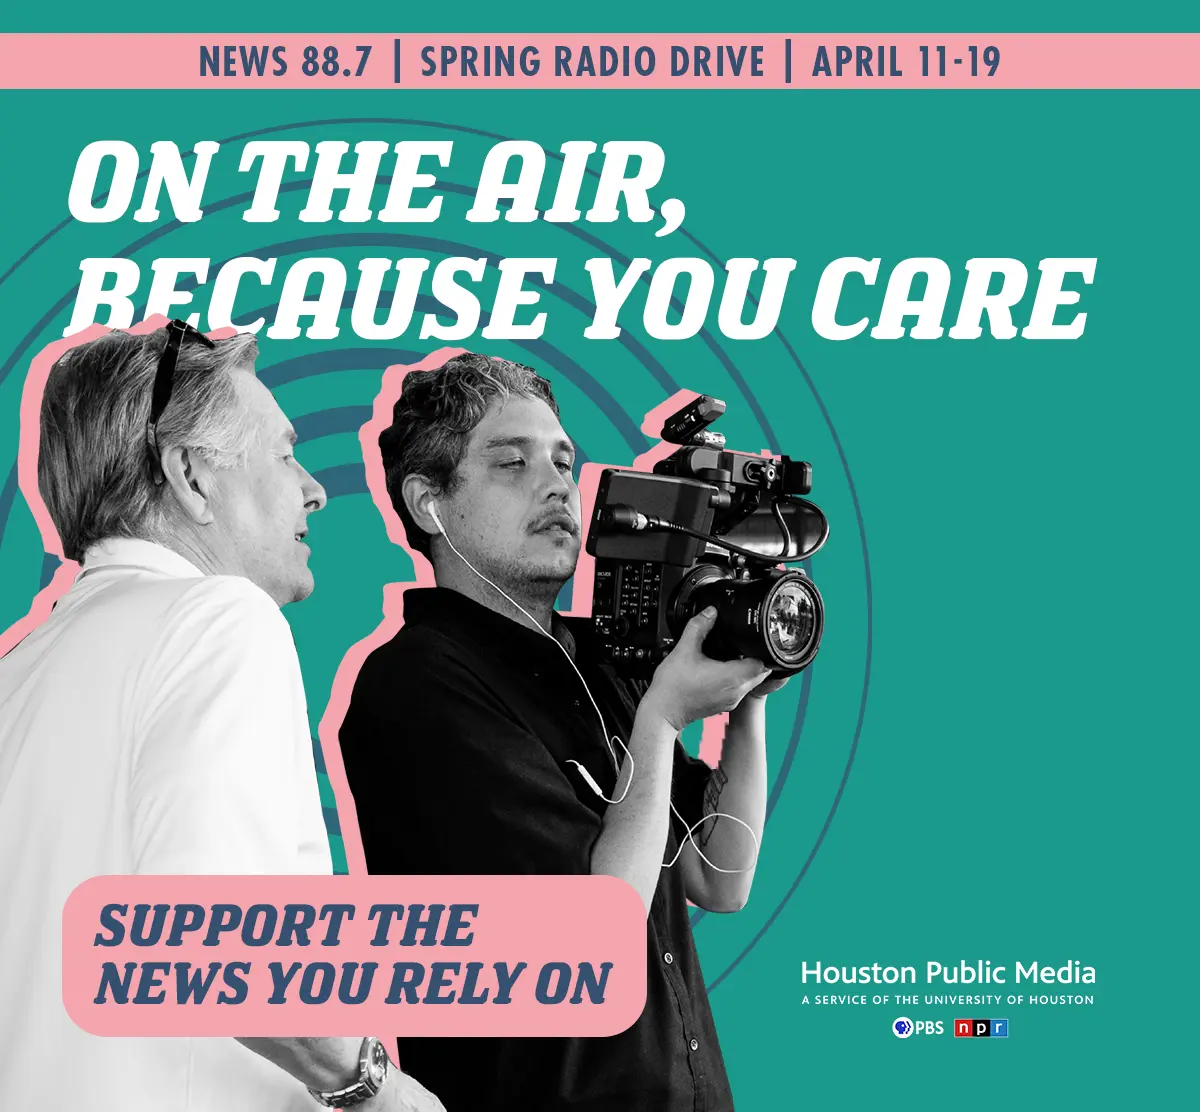 On the air because you care. Support the news you rely on